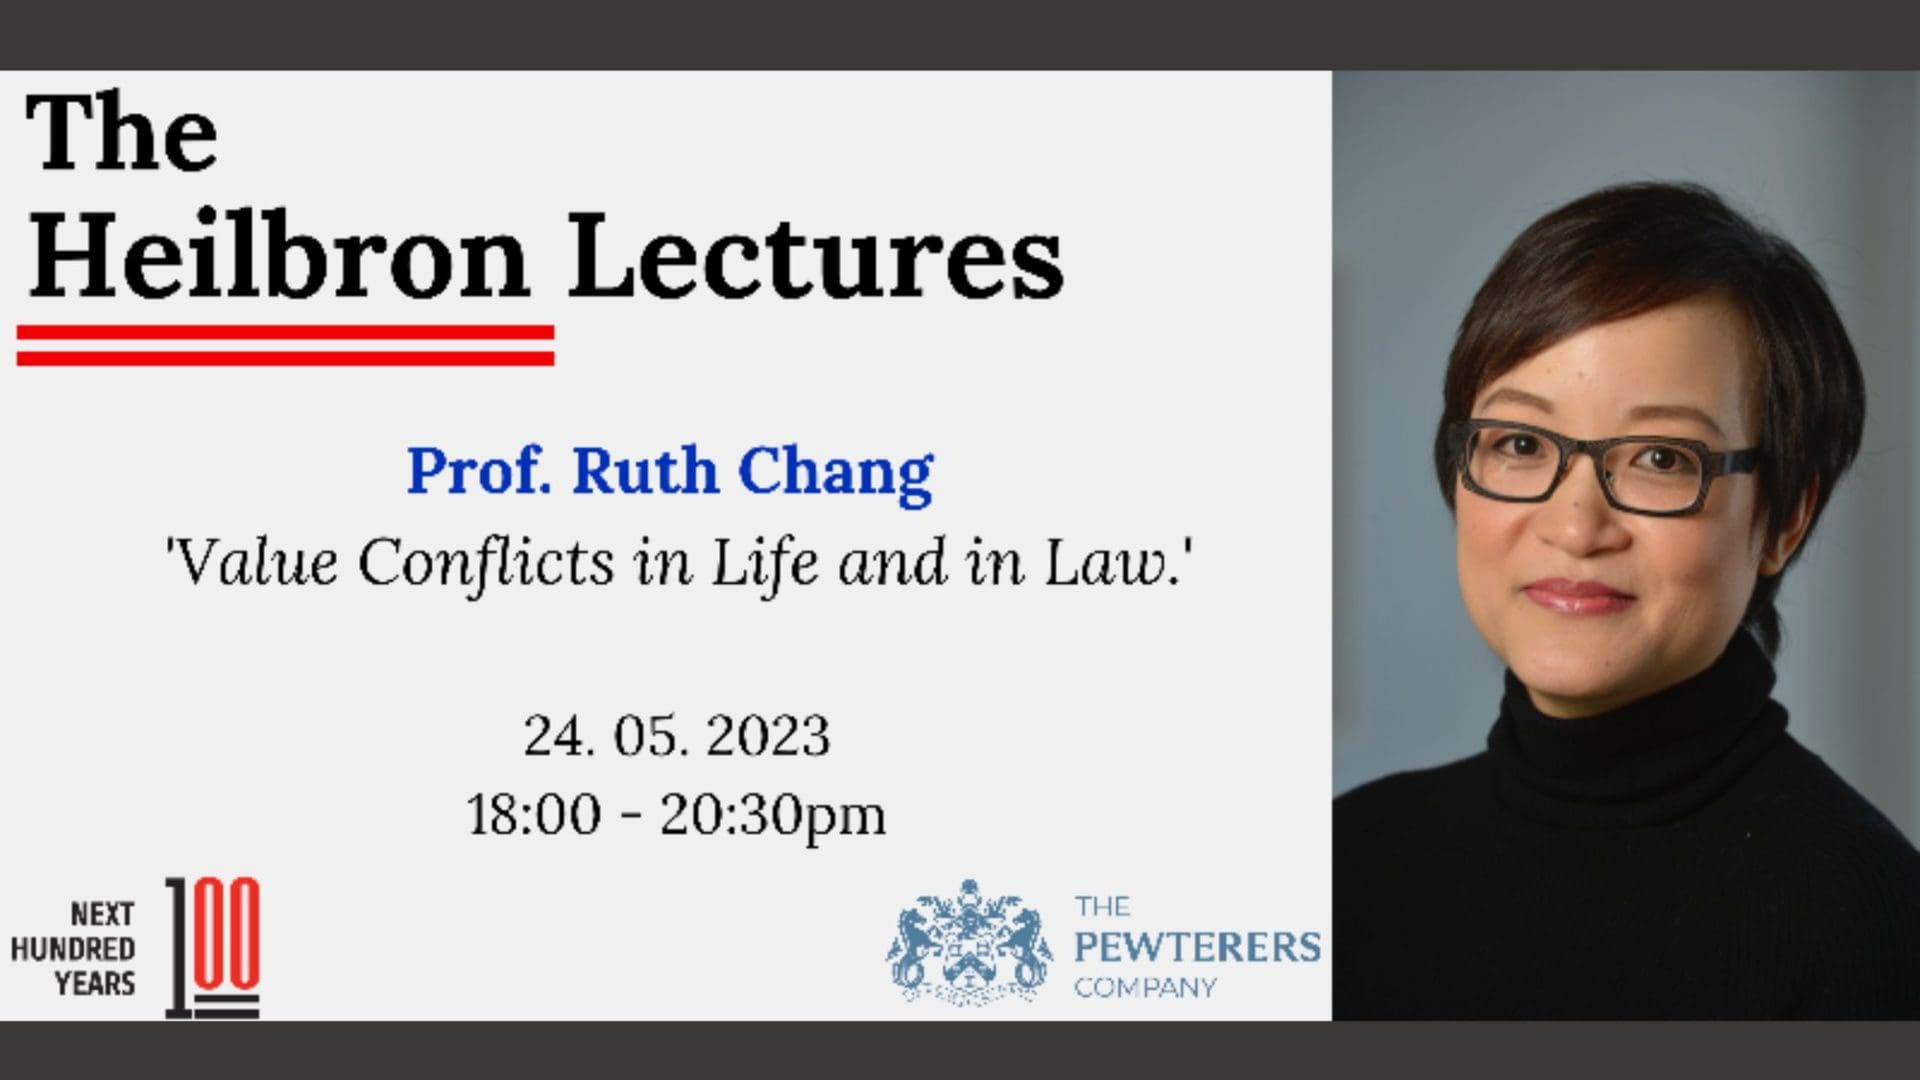 4th Heilbron Lecture Prof Ruth Chang Value